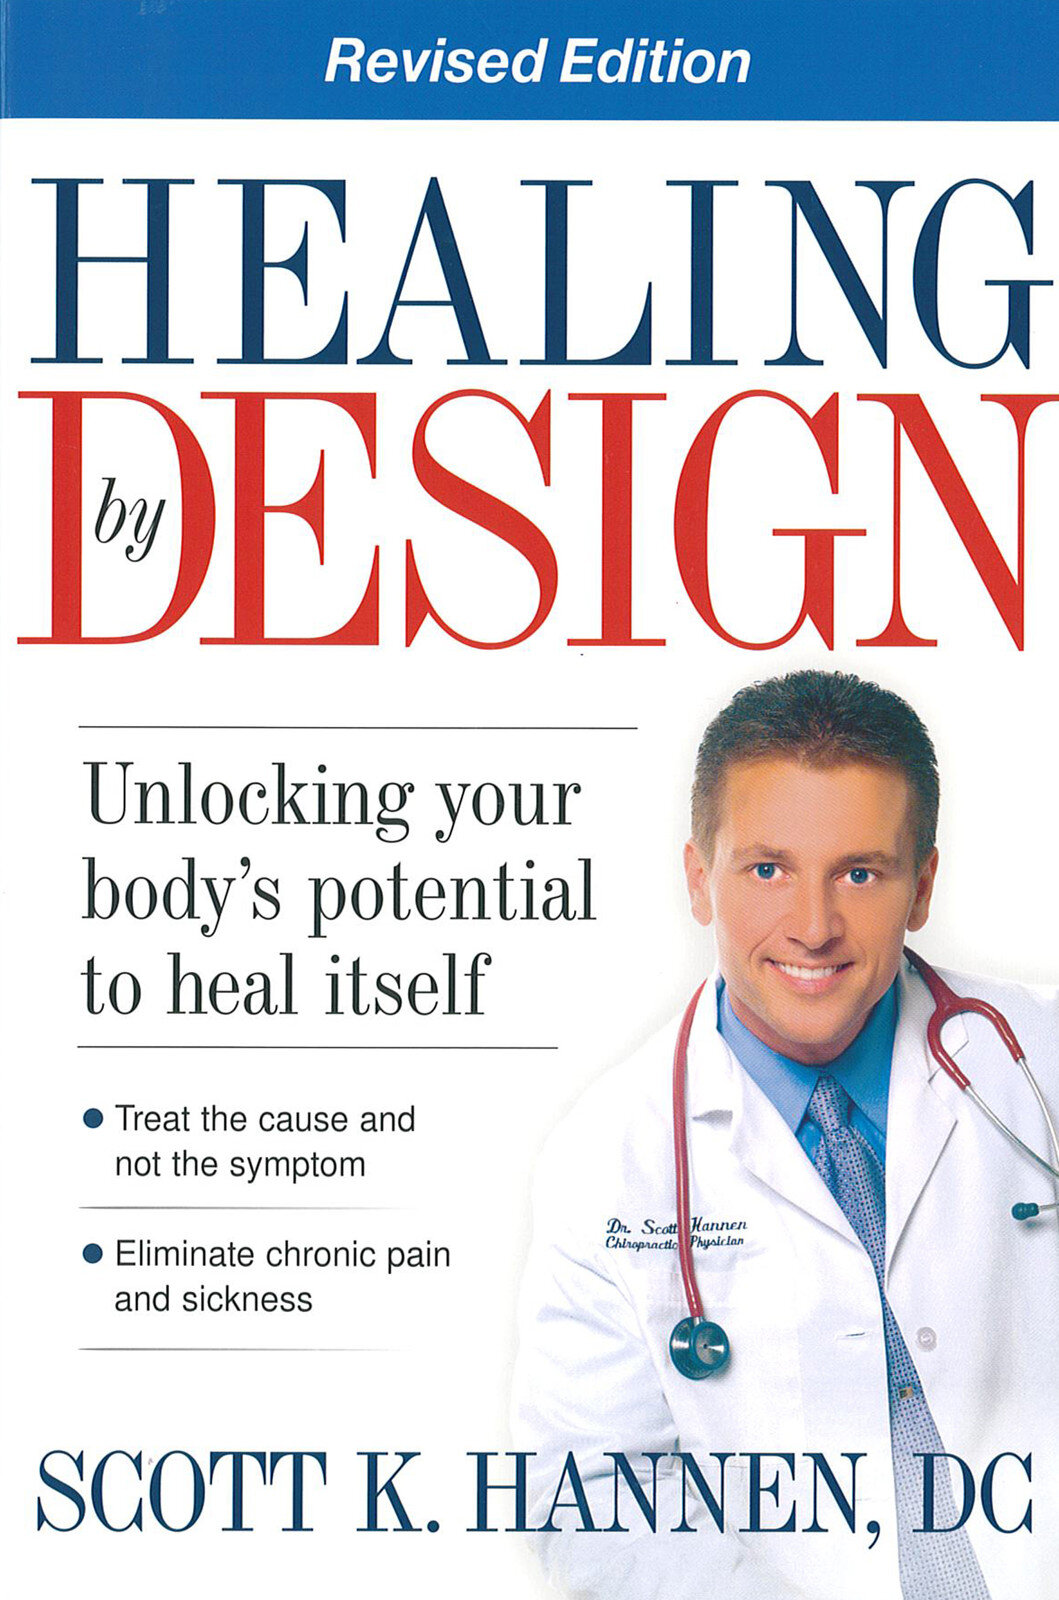 Healing By Design Unlocking Your Bodys Potential To Heal Itself Logos Bible Software